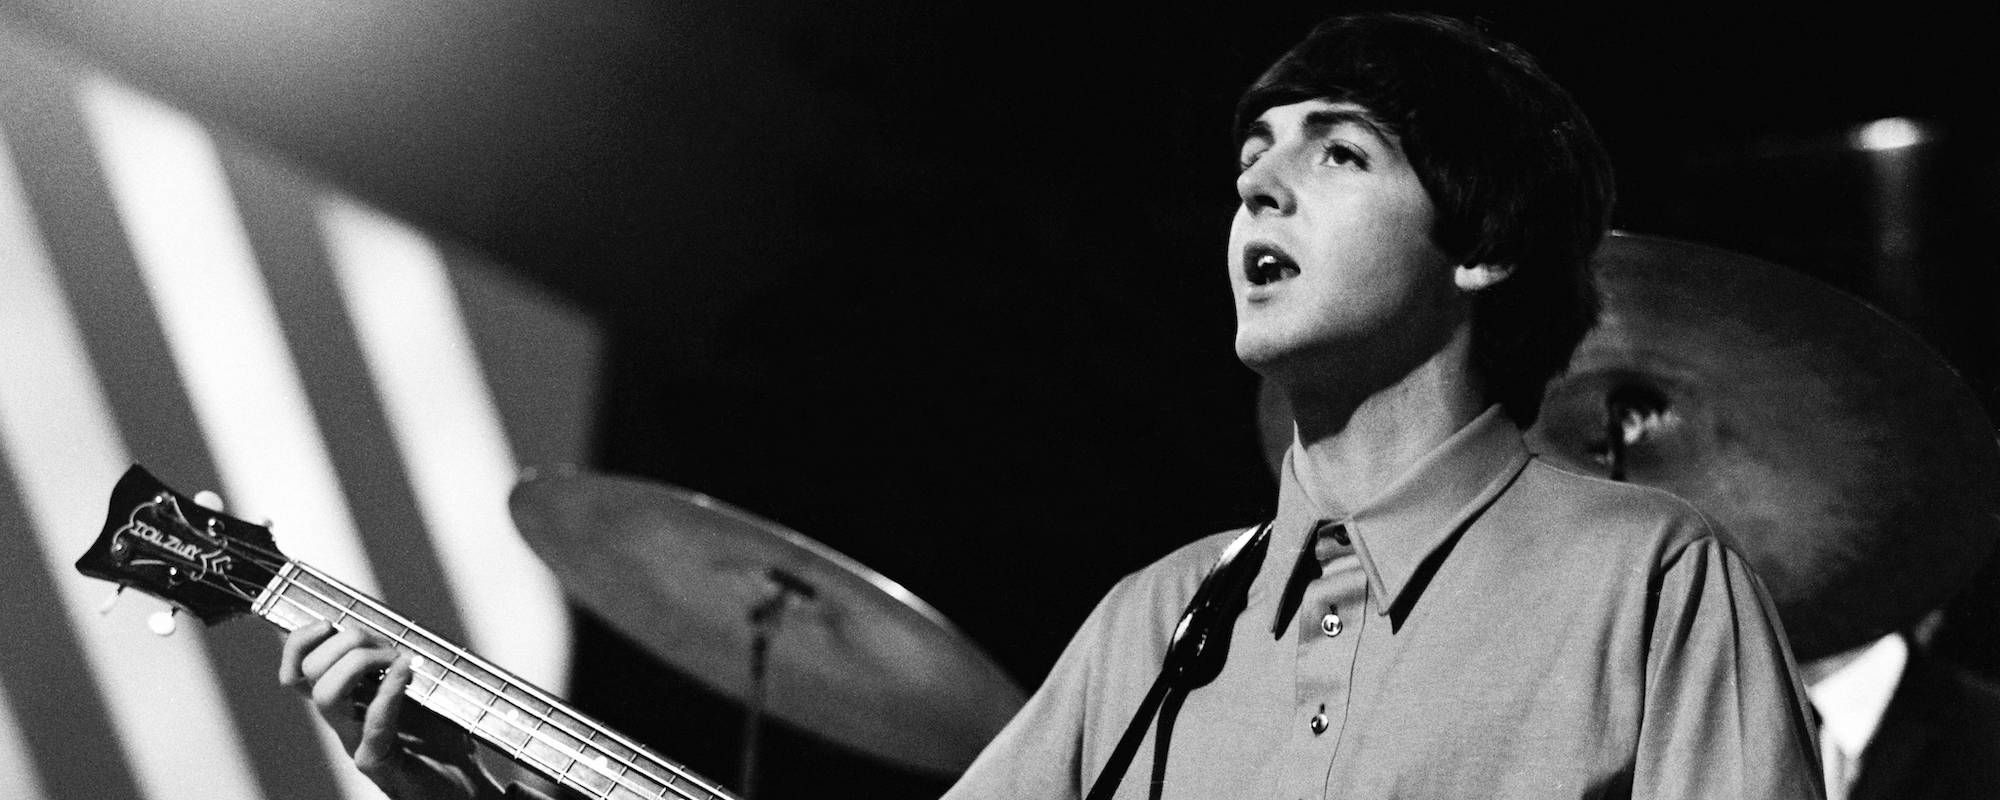 10 Songwriting Tips from Paul McCartney